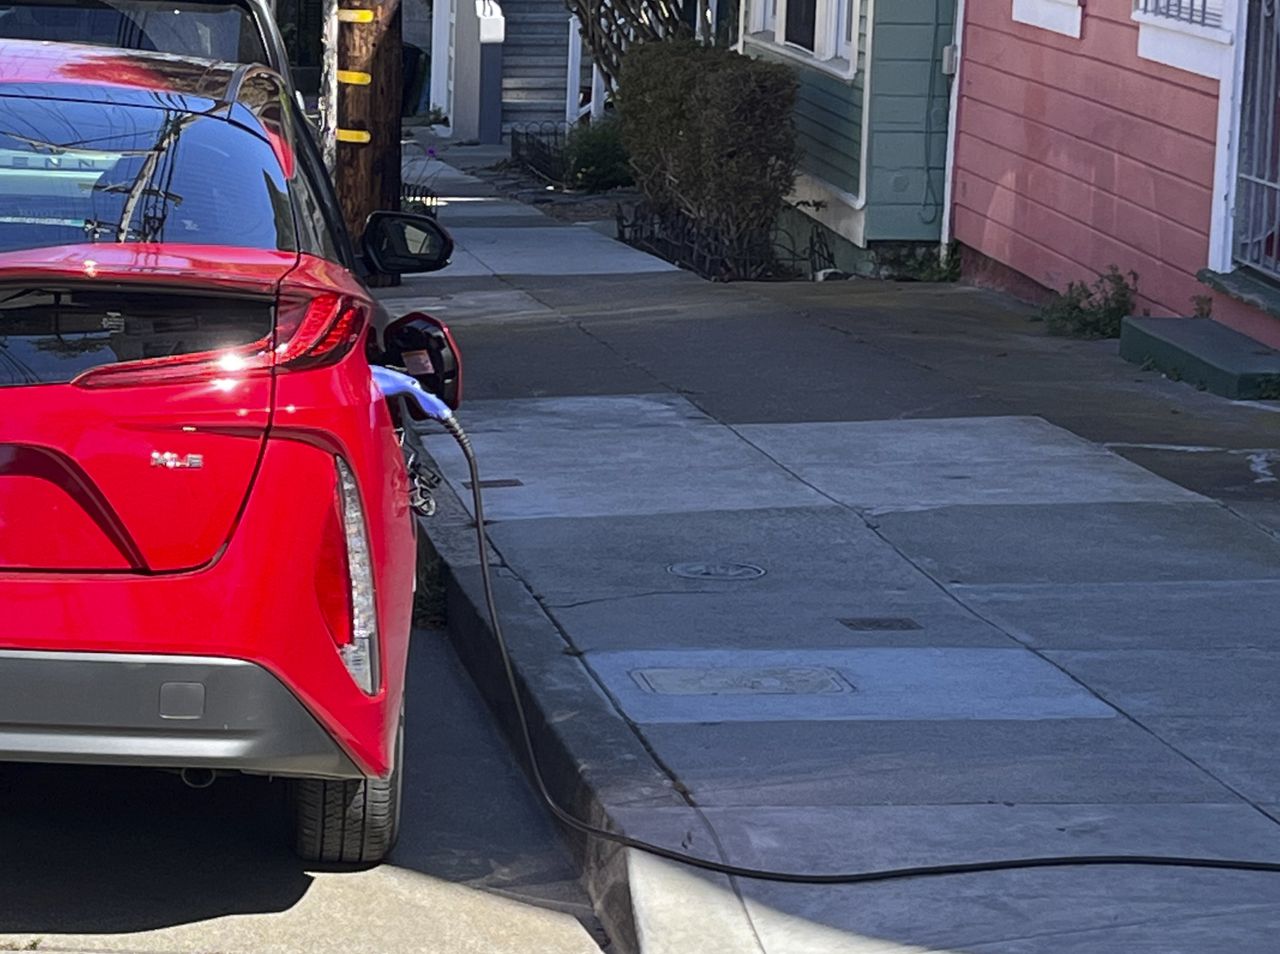 A charging cord for an electric vehicle is seen strung across a public sidewalk